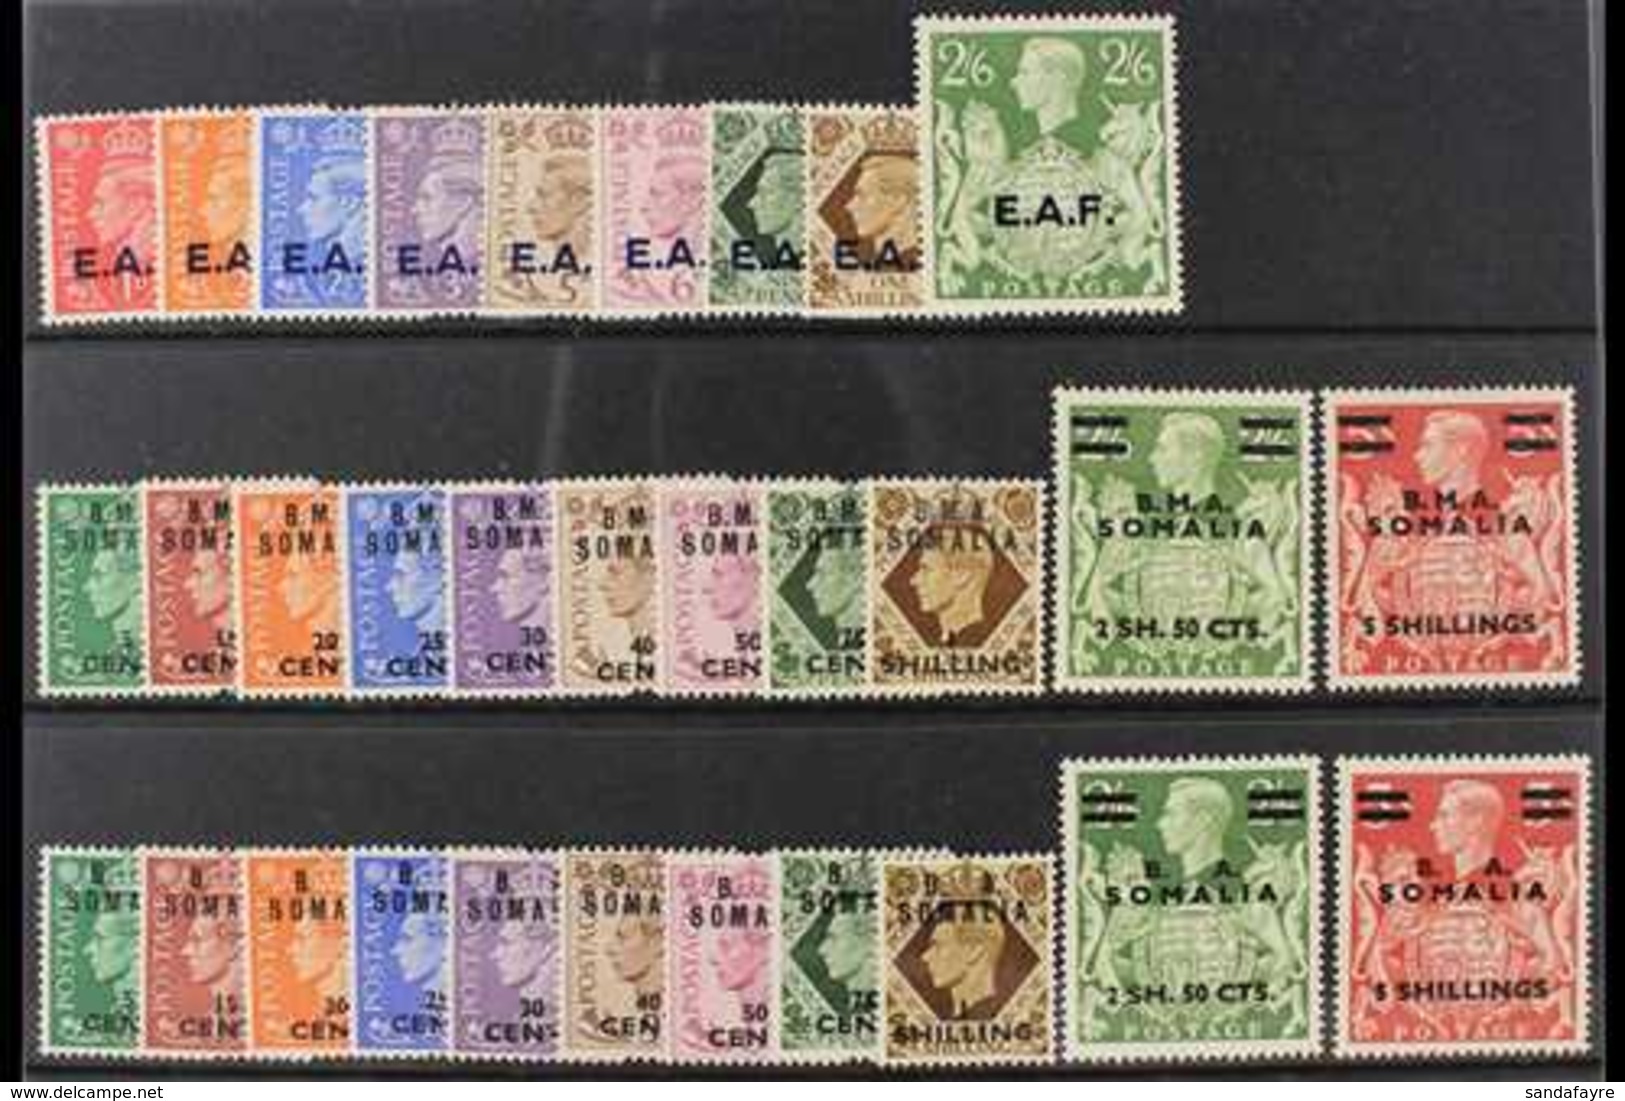 SOMALIA 1943-50 COMPLETE FINE MINT COLLECTION Presented On A Stock Card & Includes The 1938 "E.A..F." Opt'd Set, 1947 "B - Italiaans Oost-Afrika